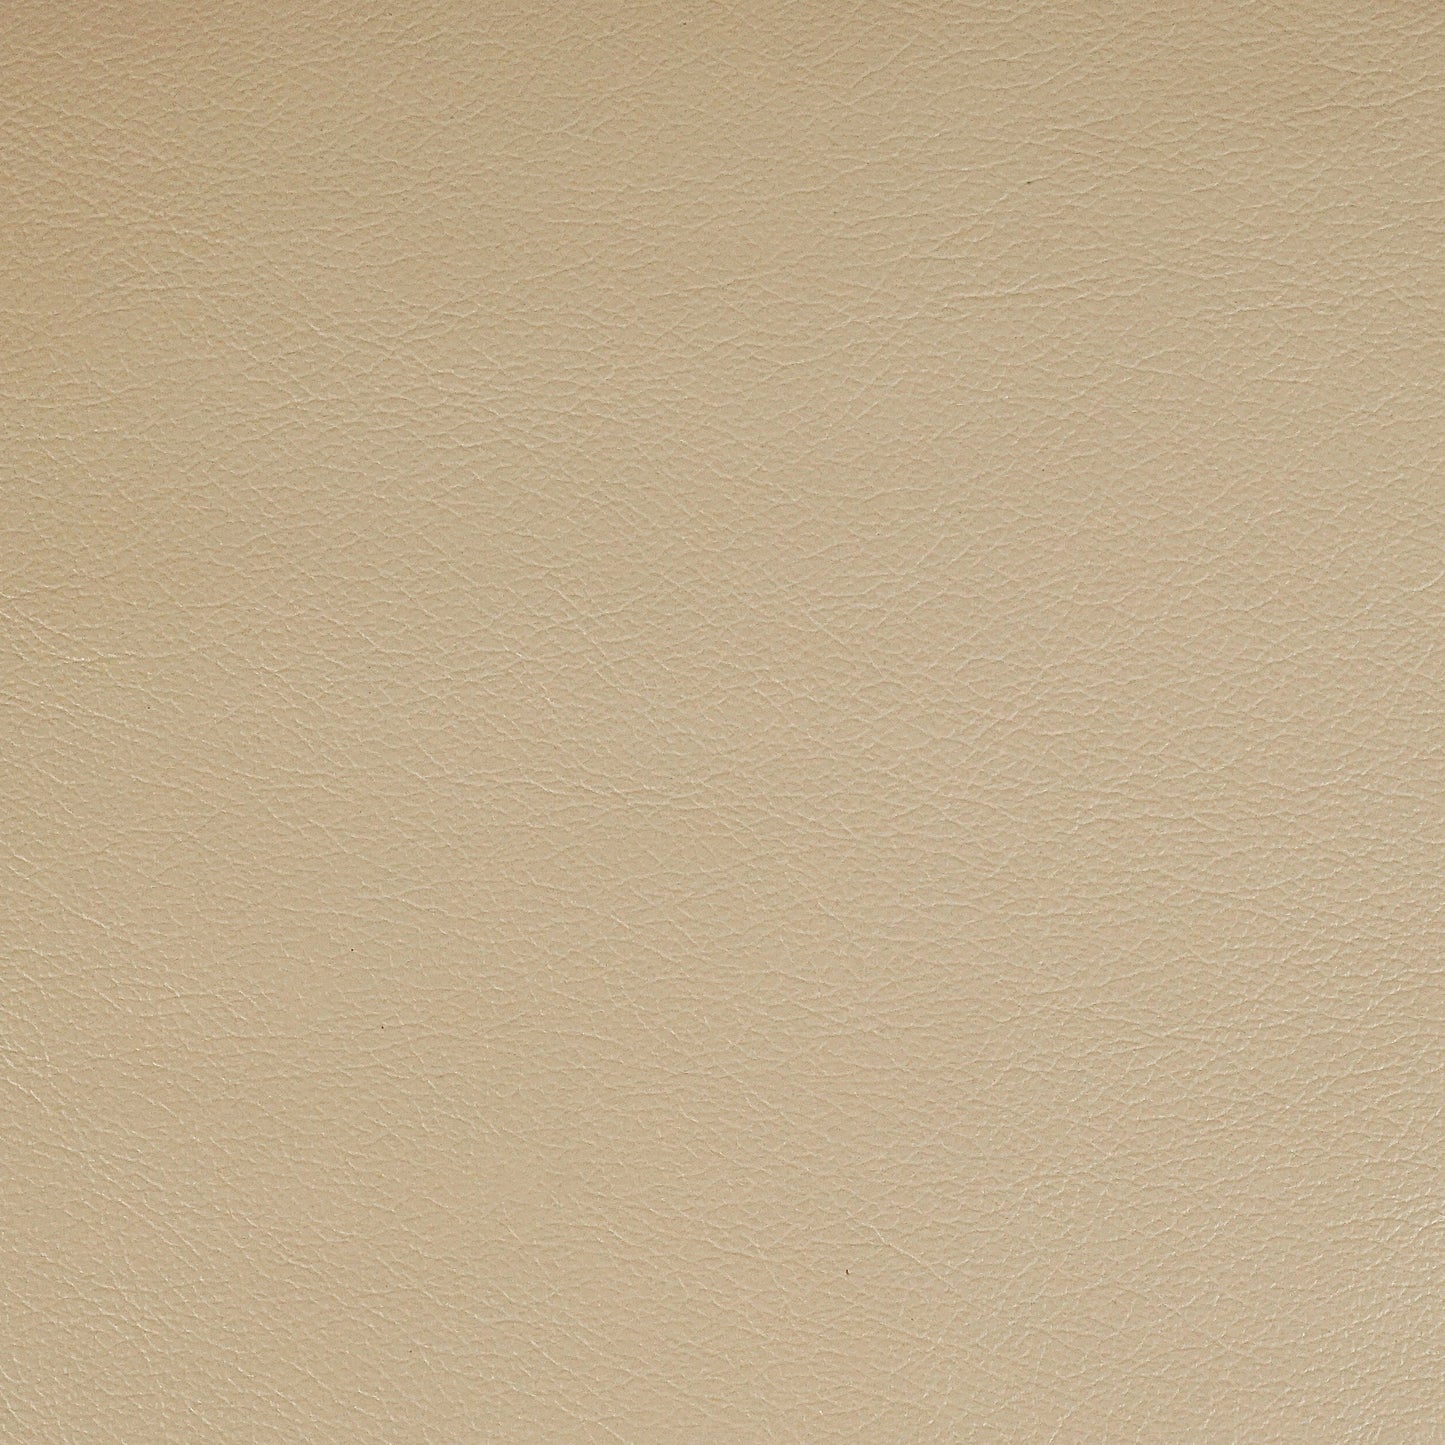 Kismet, Turtledove, Iconic® Antimicrobial & Cleanable, Hospitality Leather Hide